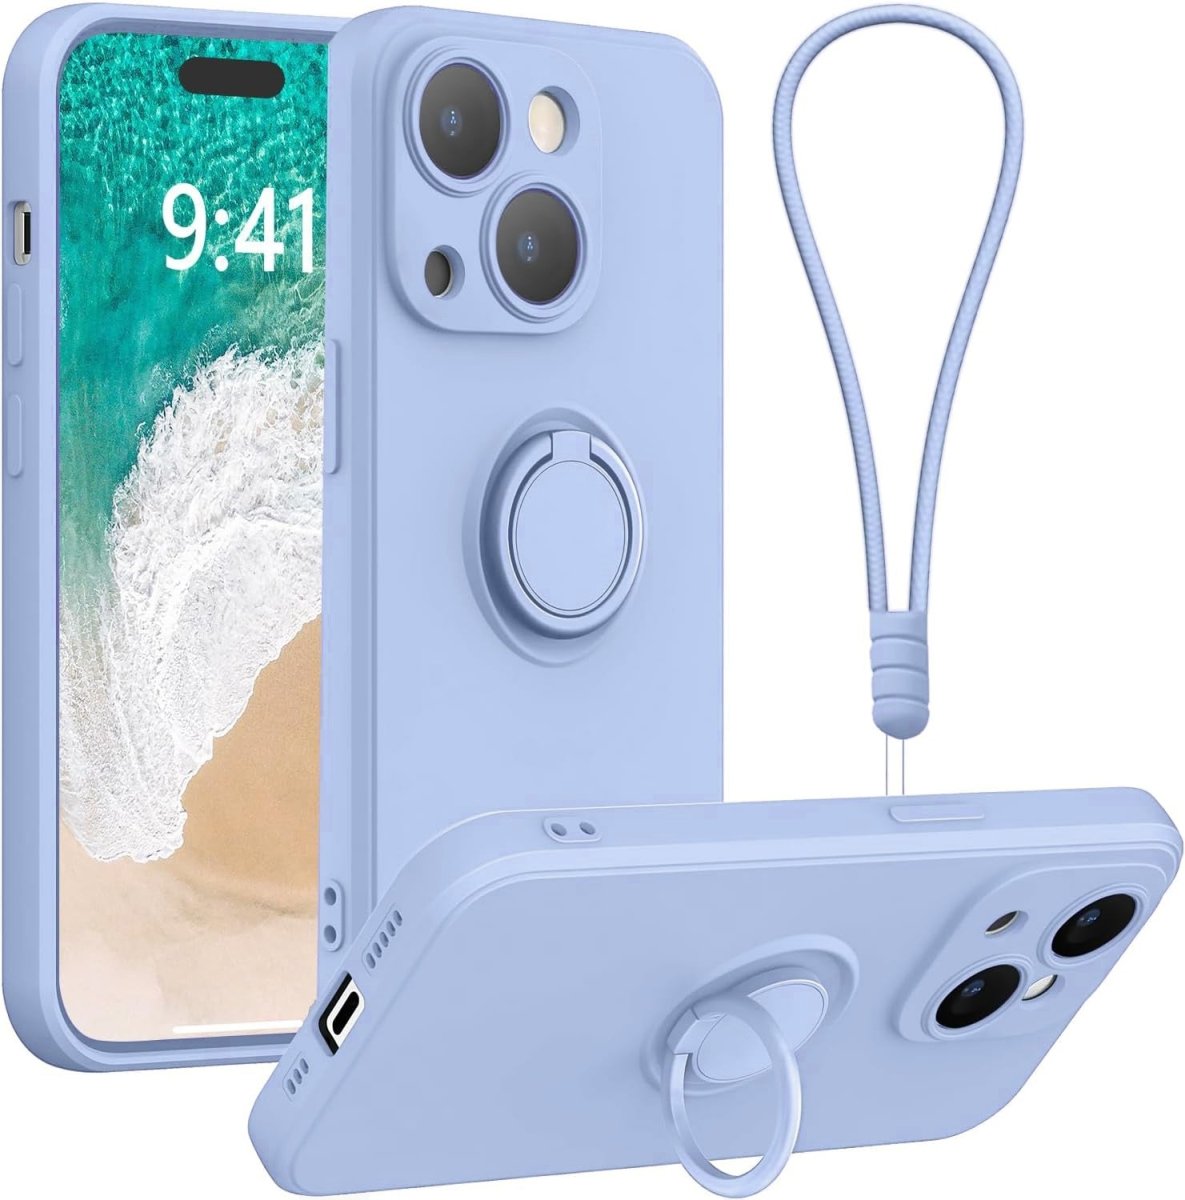 Dusky Lilac Shockproof Silicone Case For iPhone With Ring And Lanyard  Dusky Lilac iPhone 11 Accessories Gifts UK